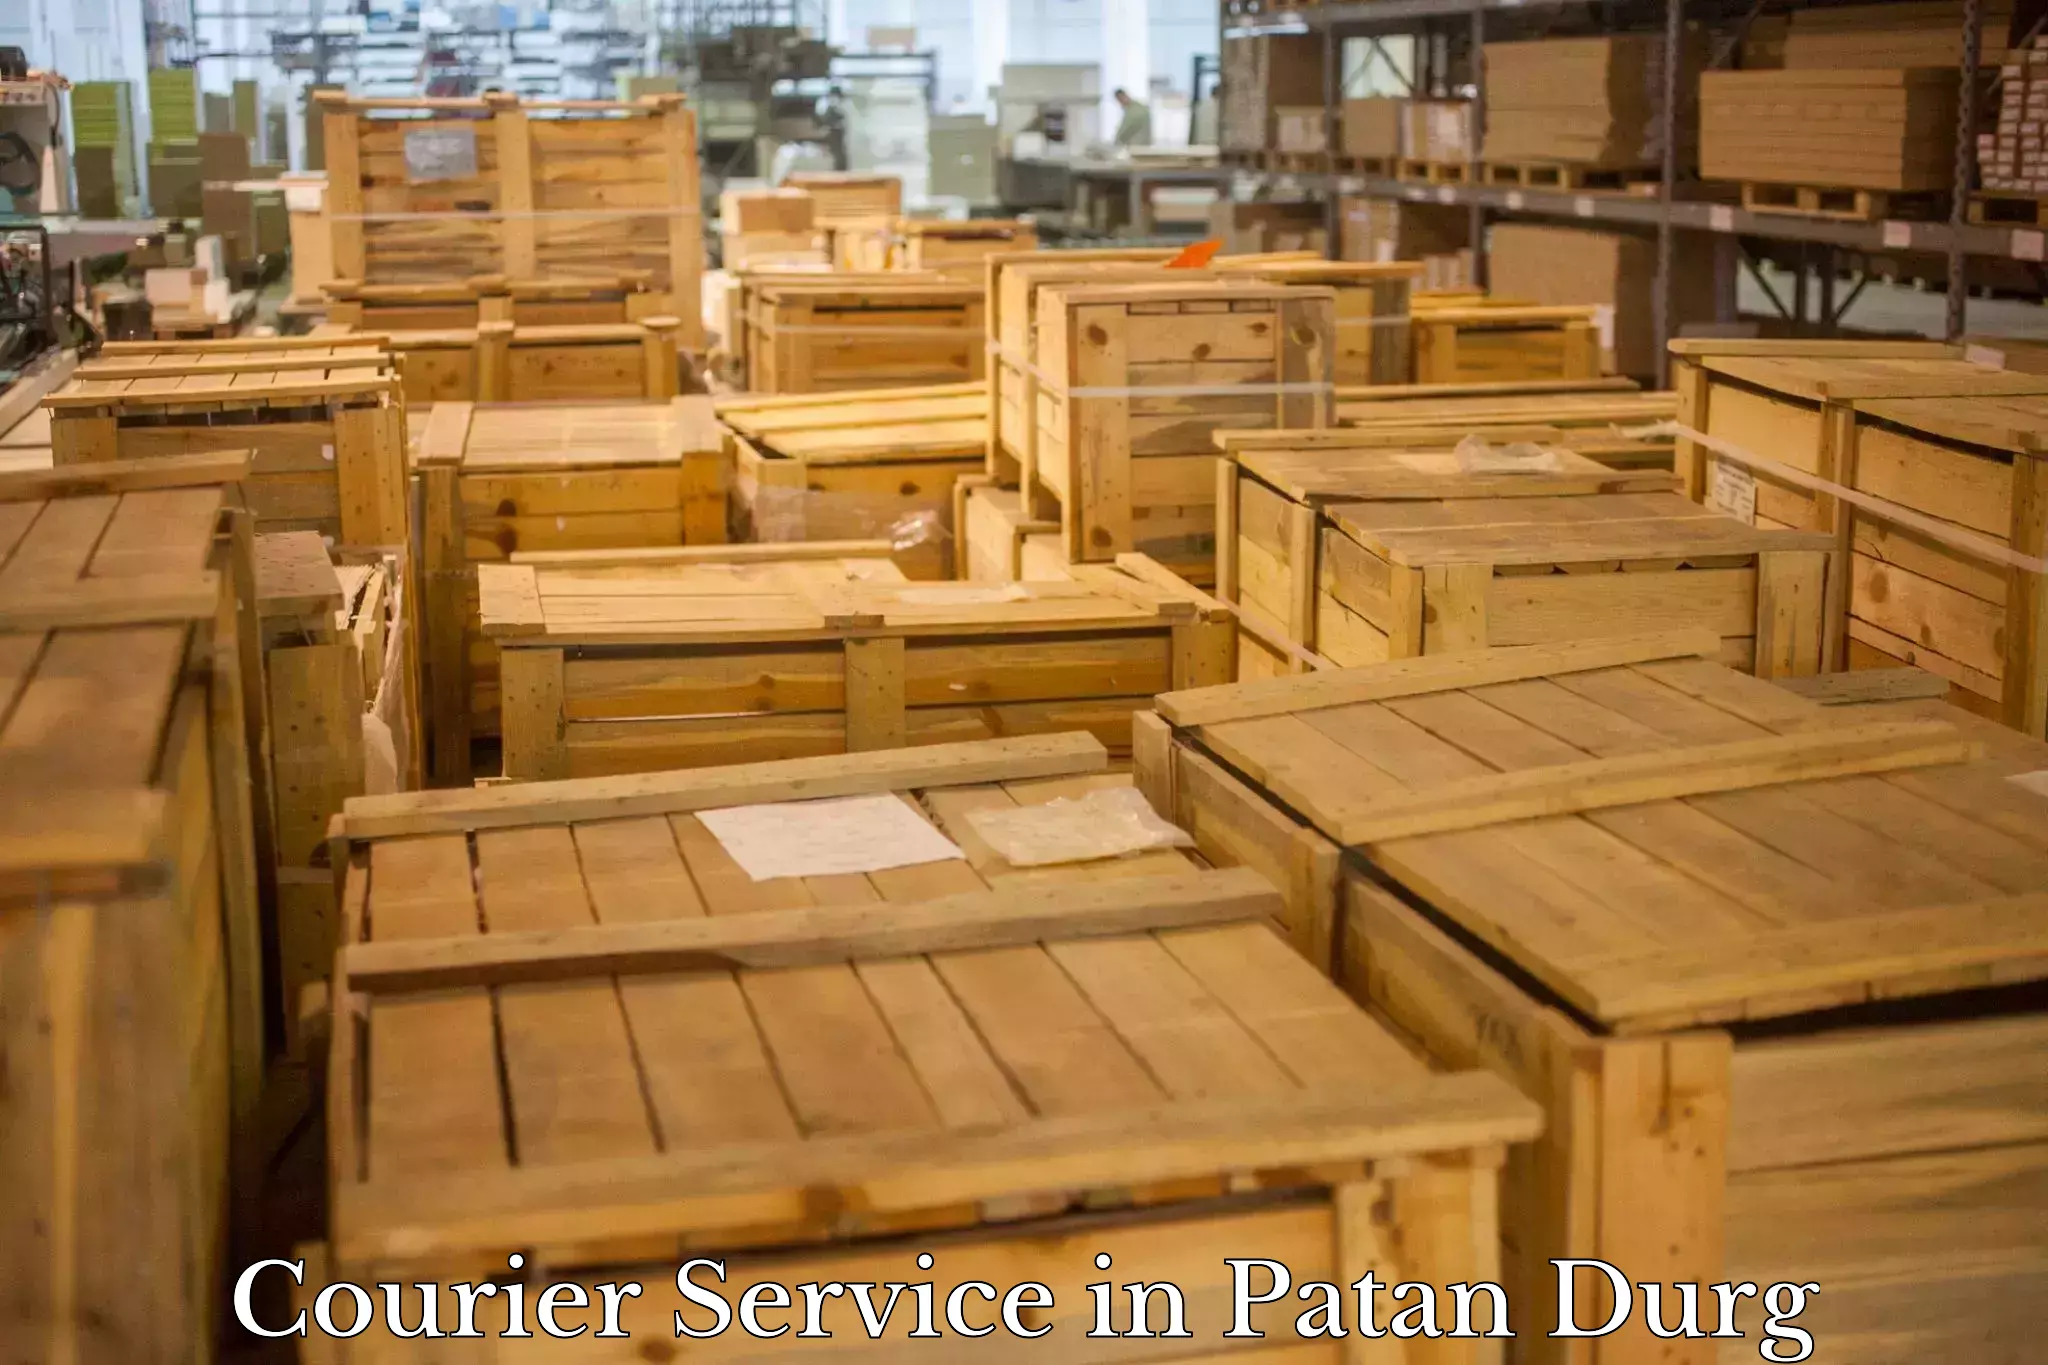 High-capacity parcel service in Patan Durg